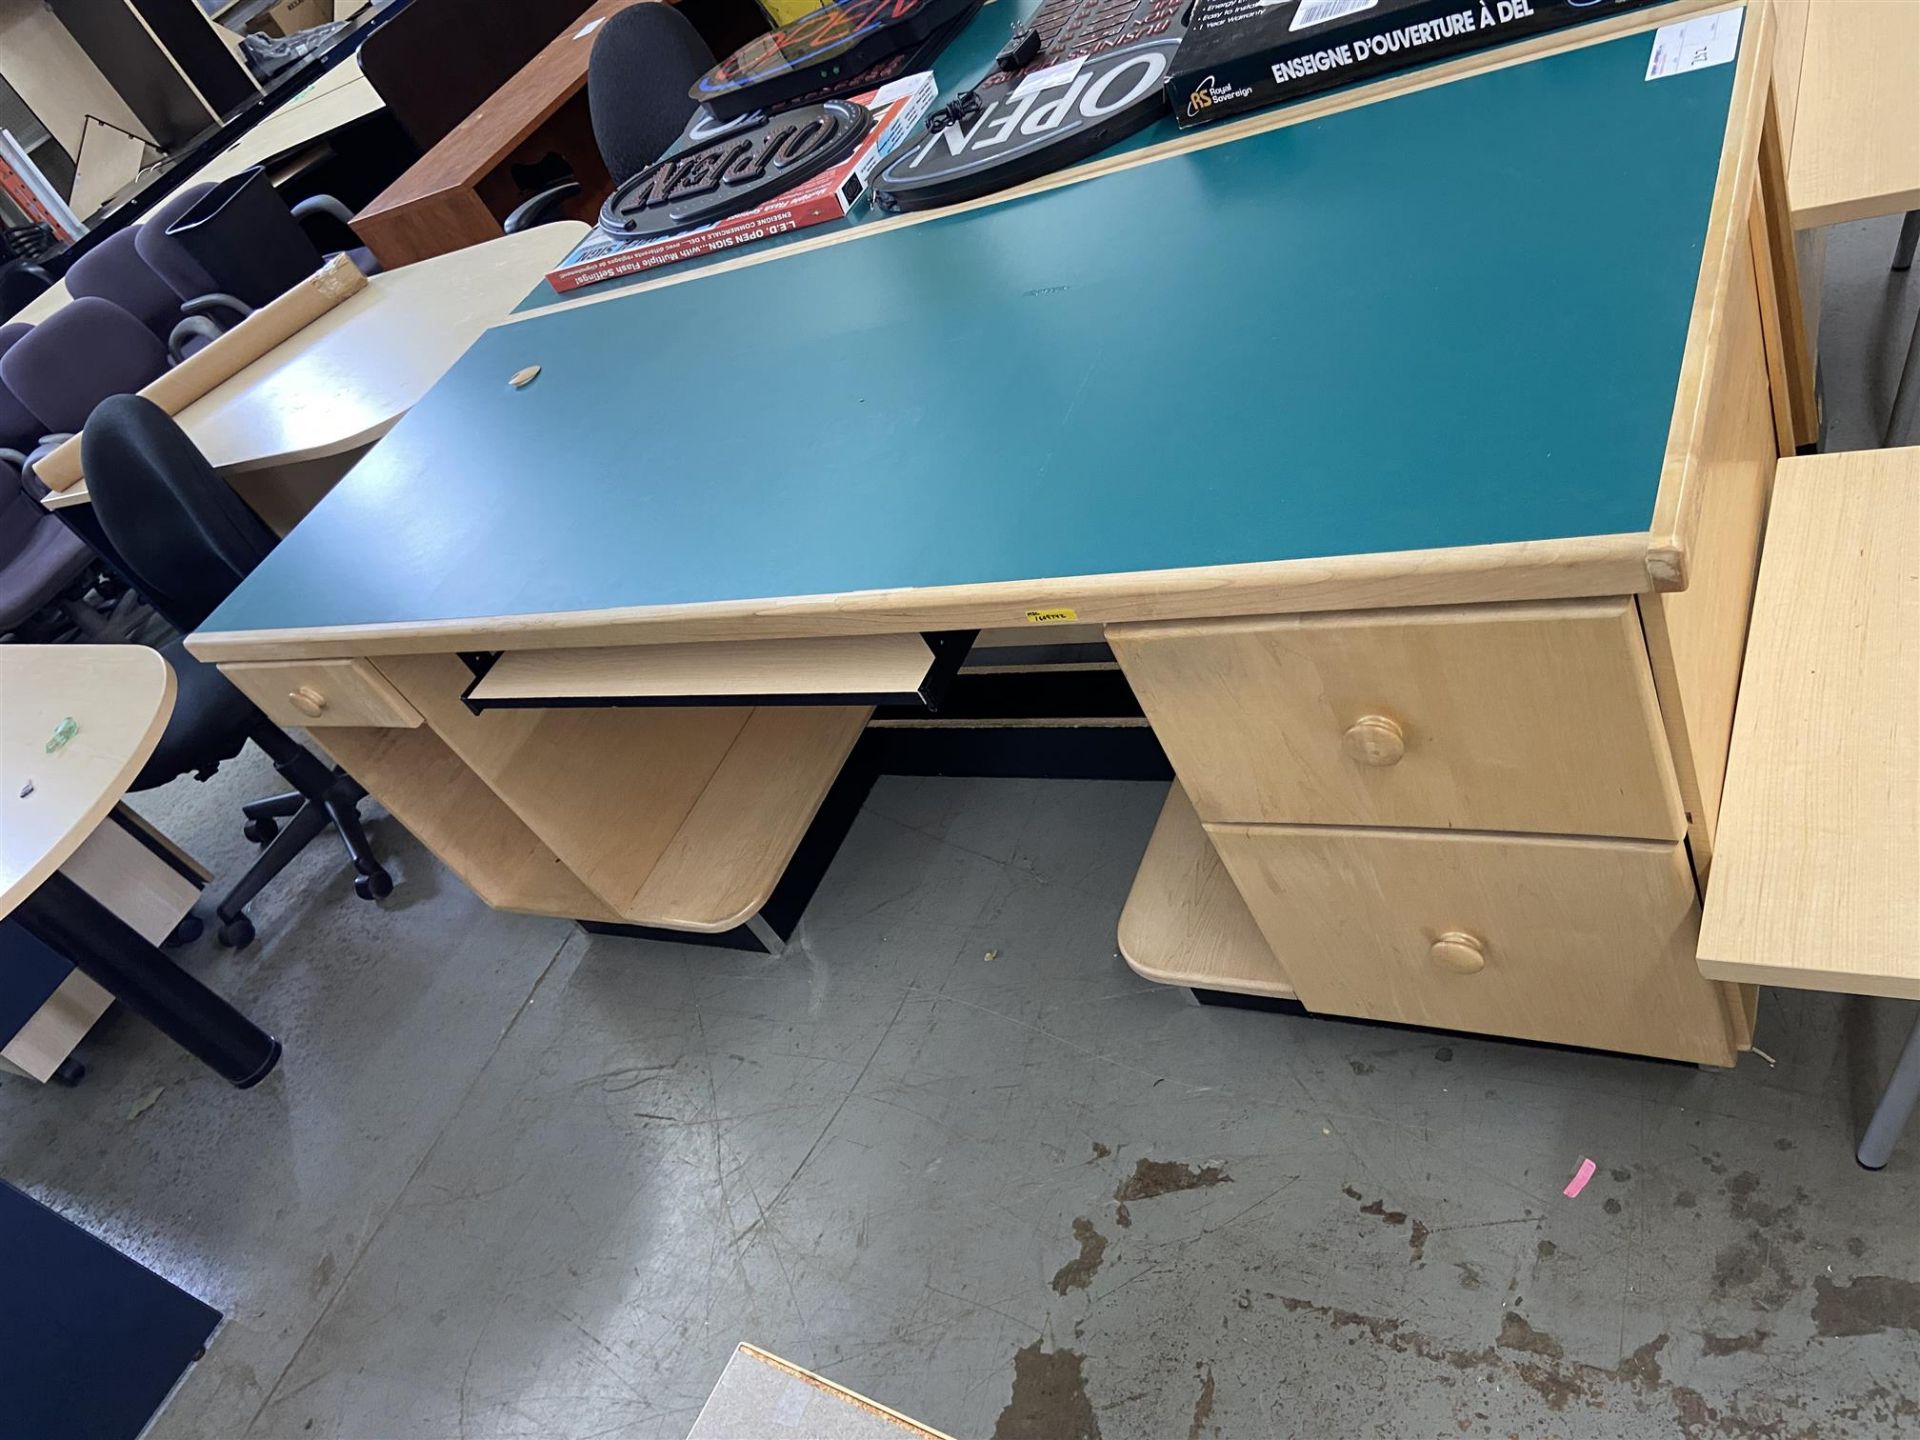 LARGE WOODEN TABLE/DESK GREEN TOP, DOUBLE PEDISTAL, 76X31 - (SEE PHOTOS FOR DETAILS)